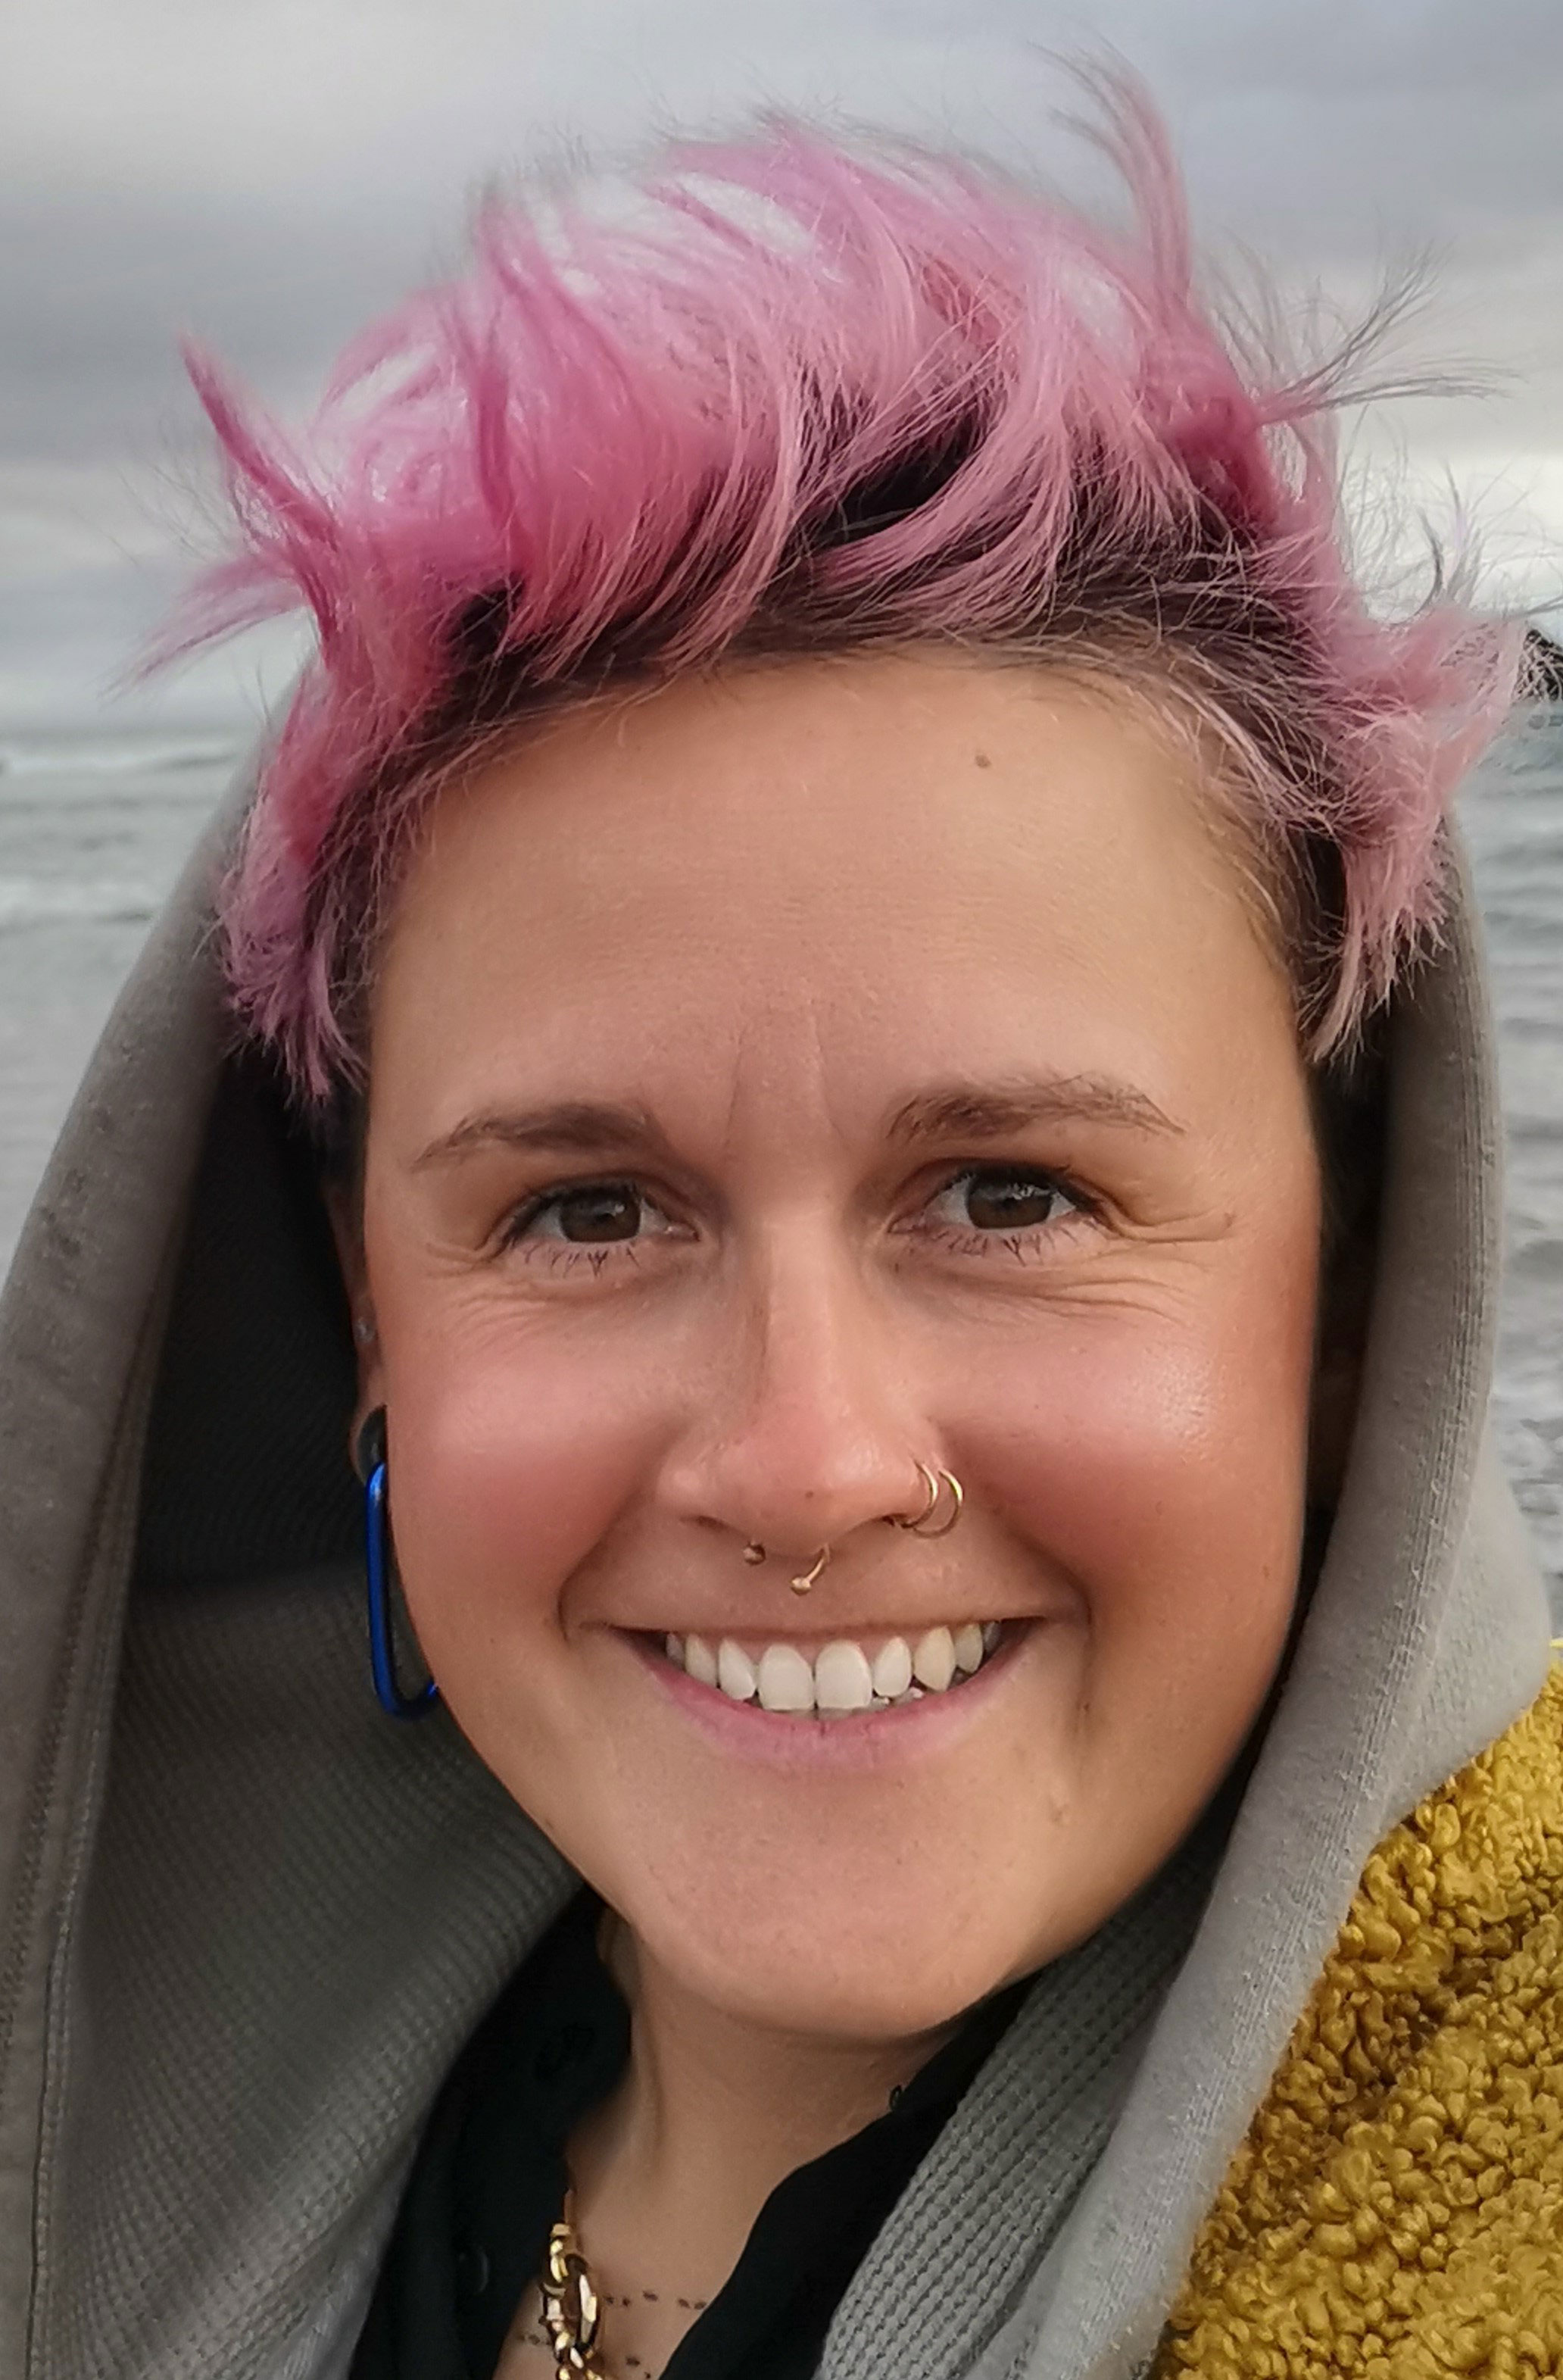 A photo of a woman smiling at the camera. She has bubblegum pink short hair which is sticking out from a grey hoodie